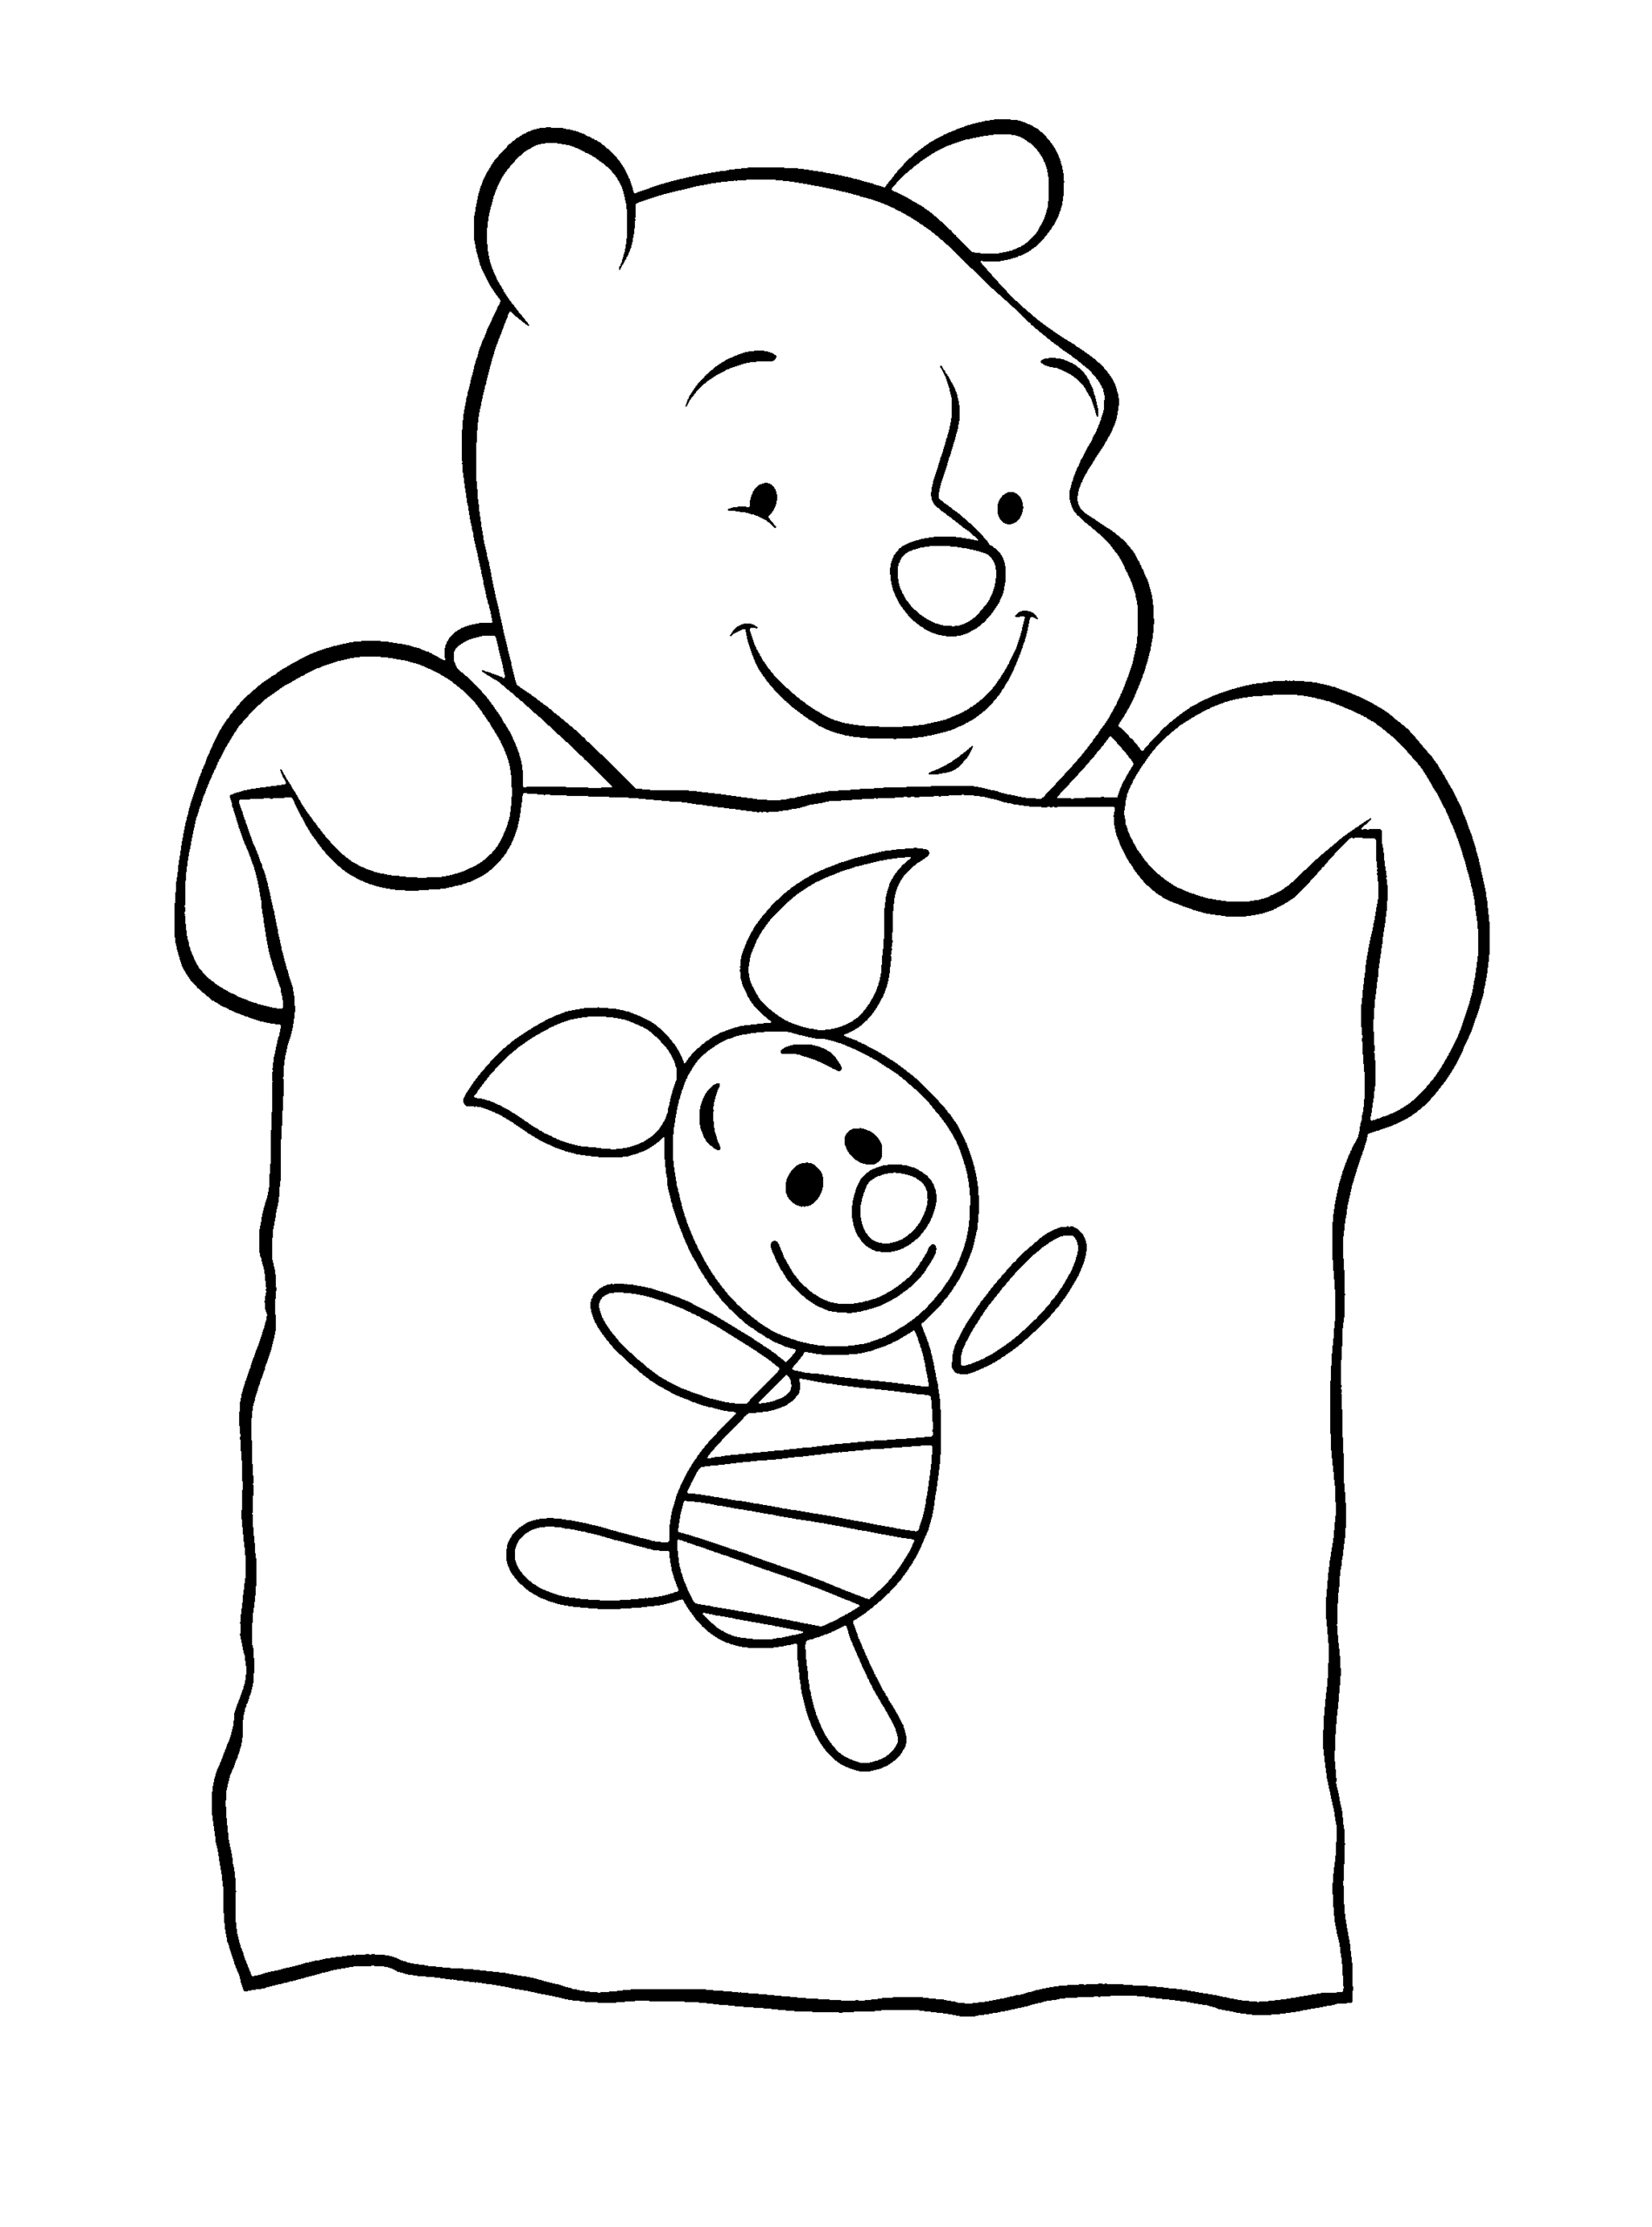 Winnie the Pooh Coloring Pages Cartoons winnie the pooh 12 Printable 2020 7100 Coloring4free